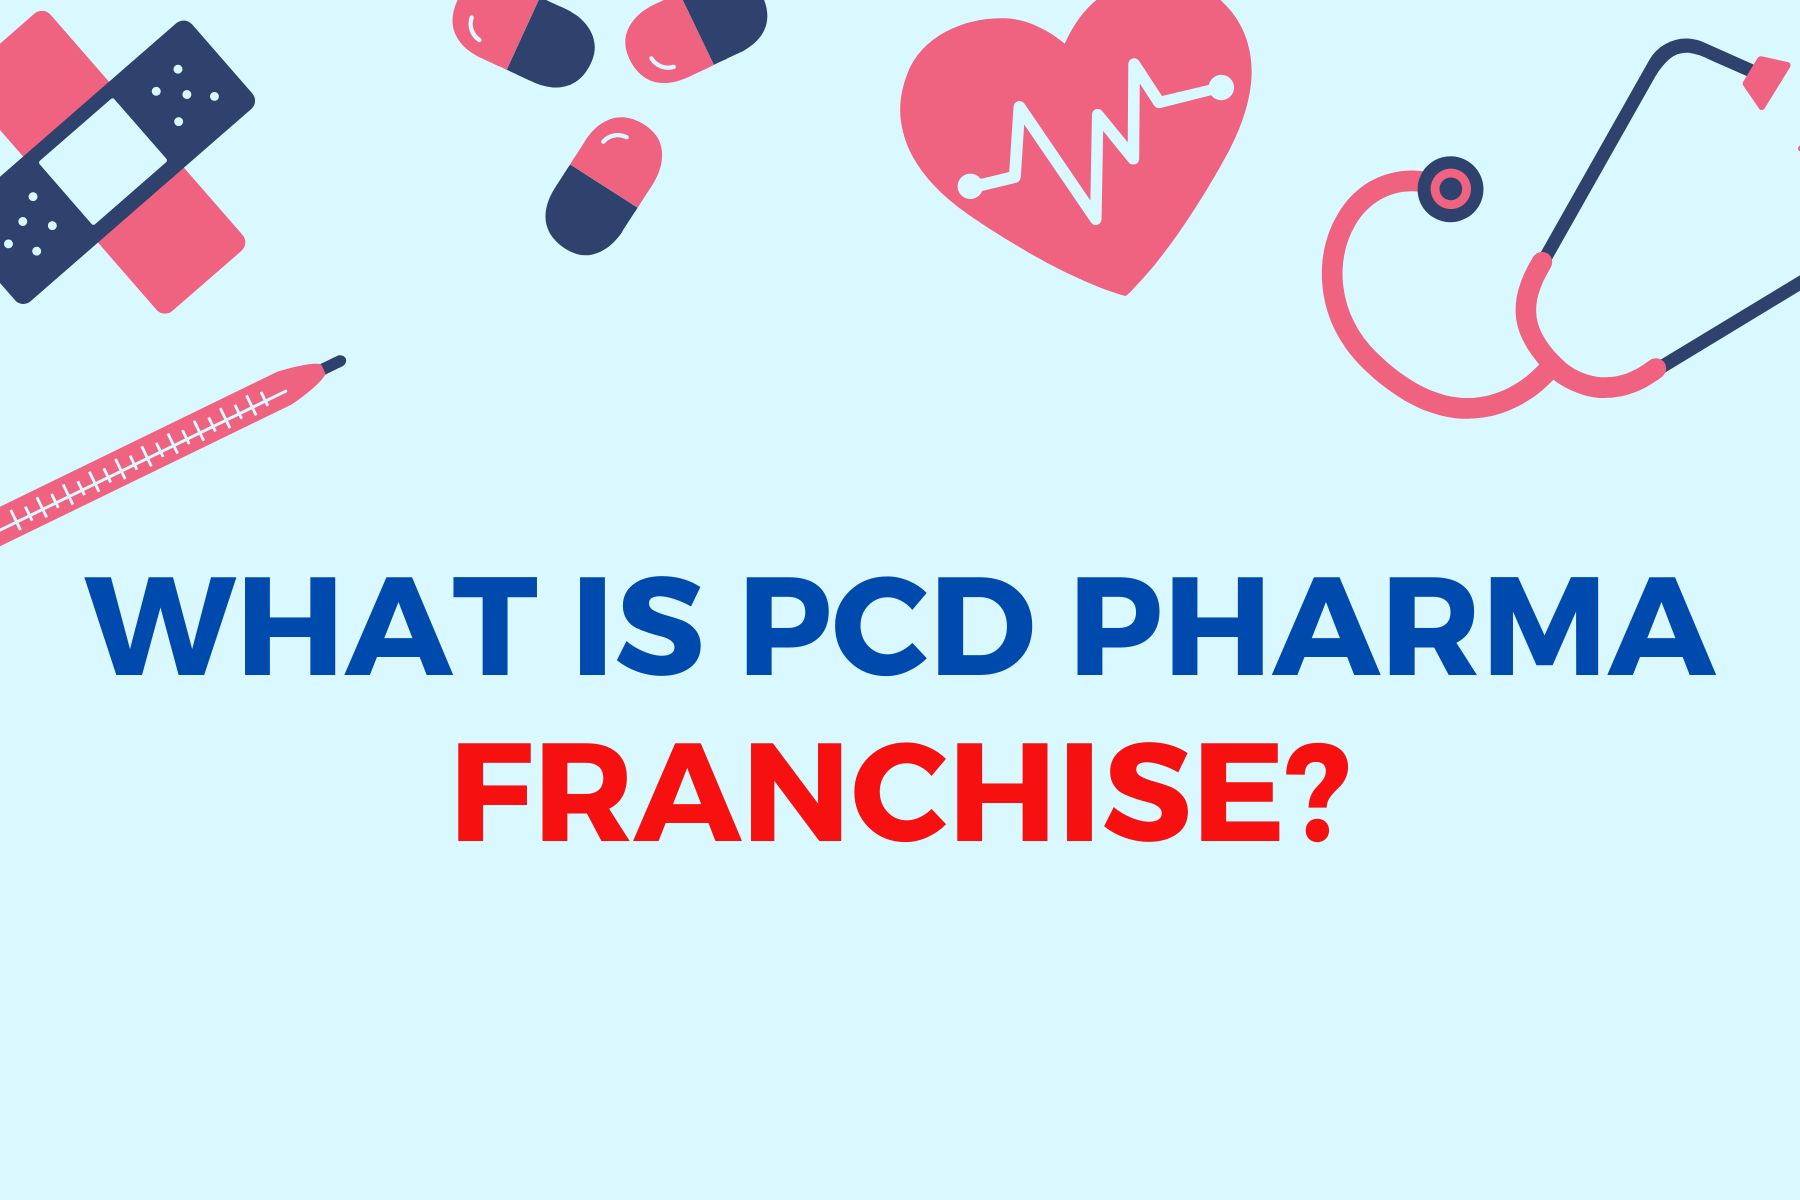 What is PCD Pharma Franchise?